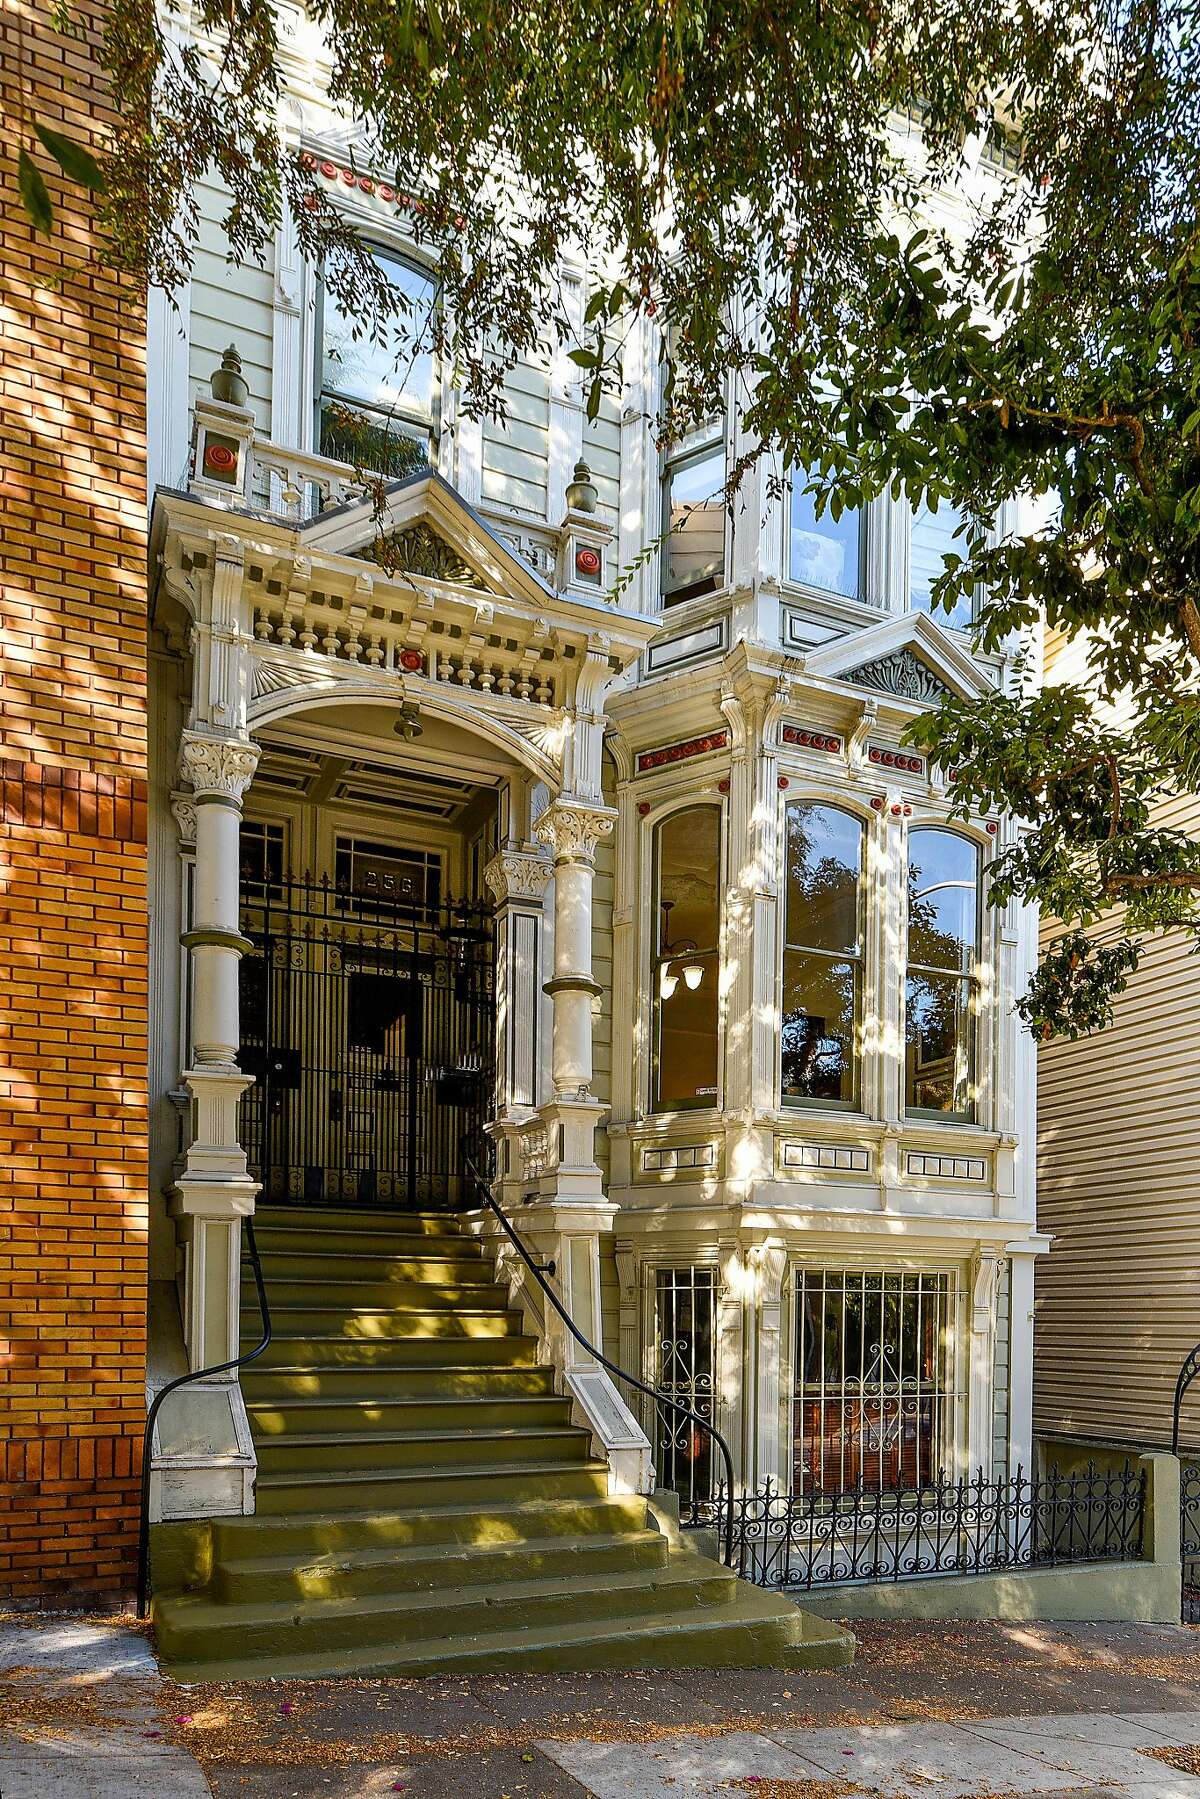 One of many properties in San Francisco that had a recent price cut, this Victorian condo at 256 Page in Hayes Valley was recently reduced by $100,000 to $1,595,000.